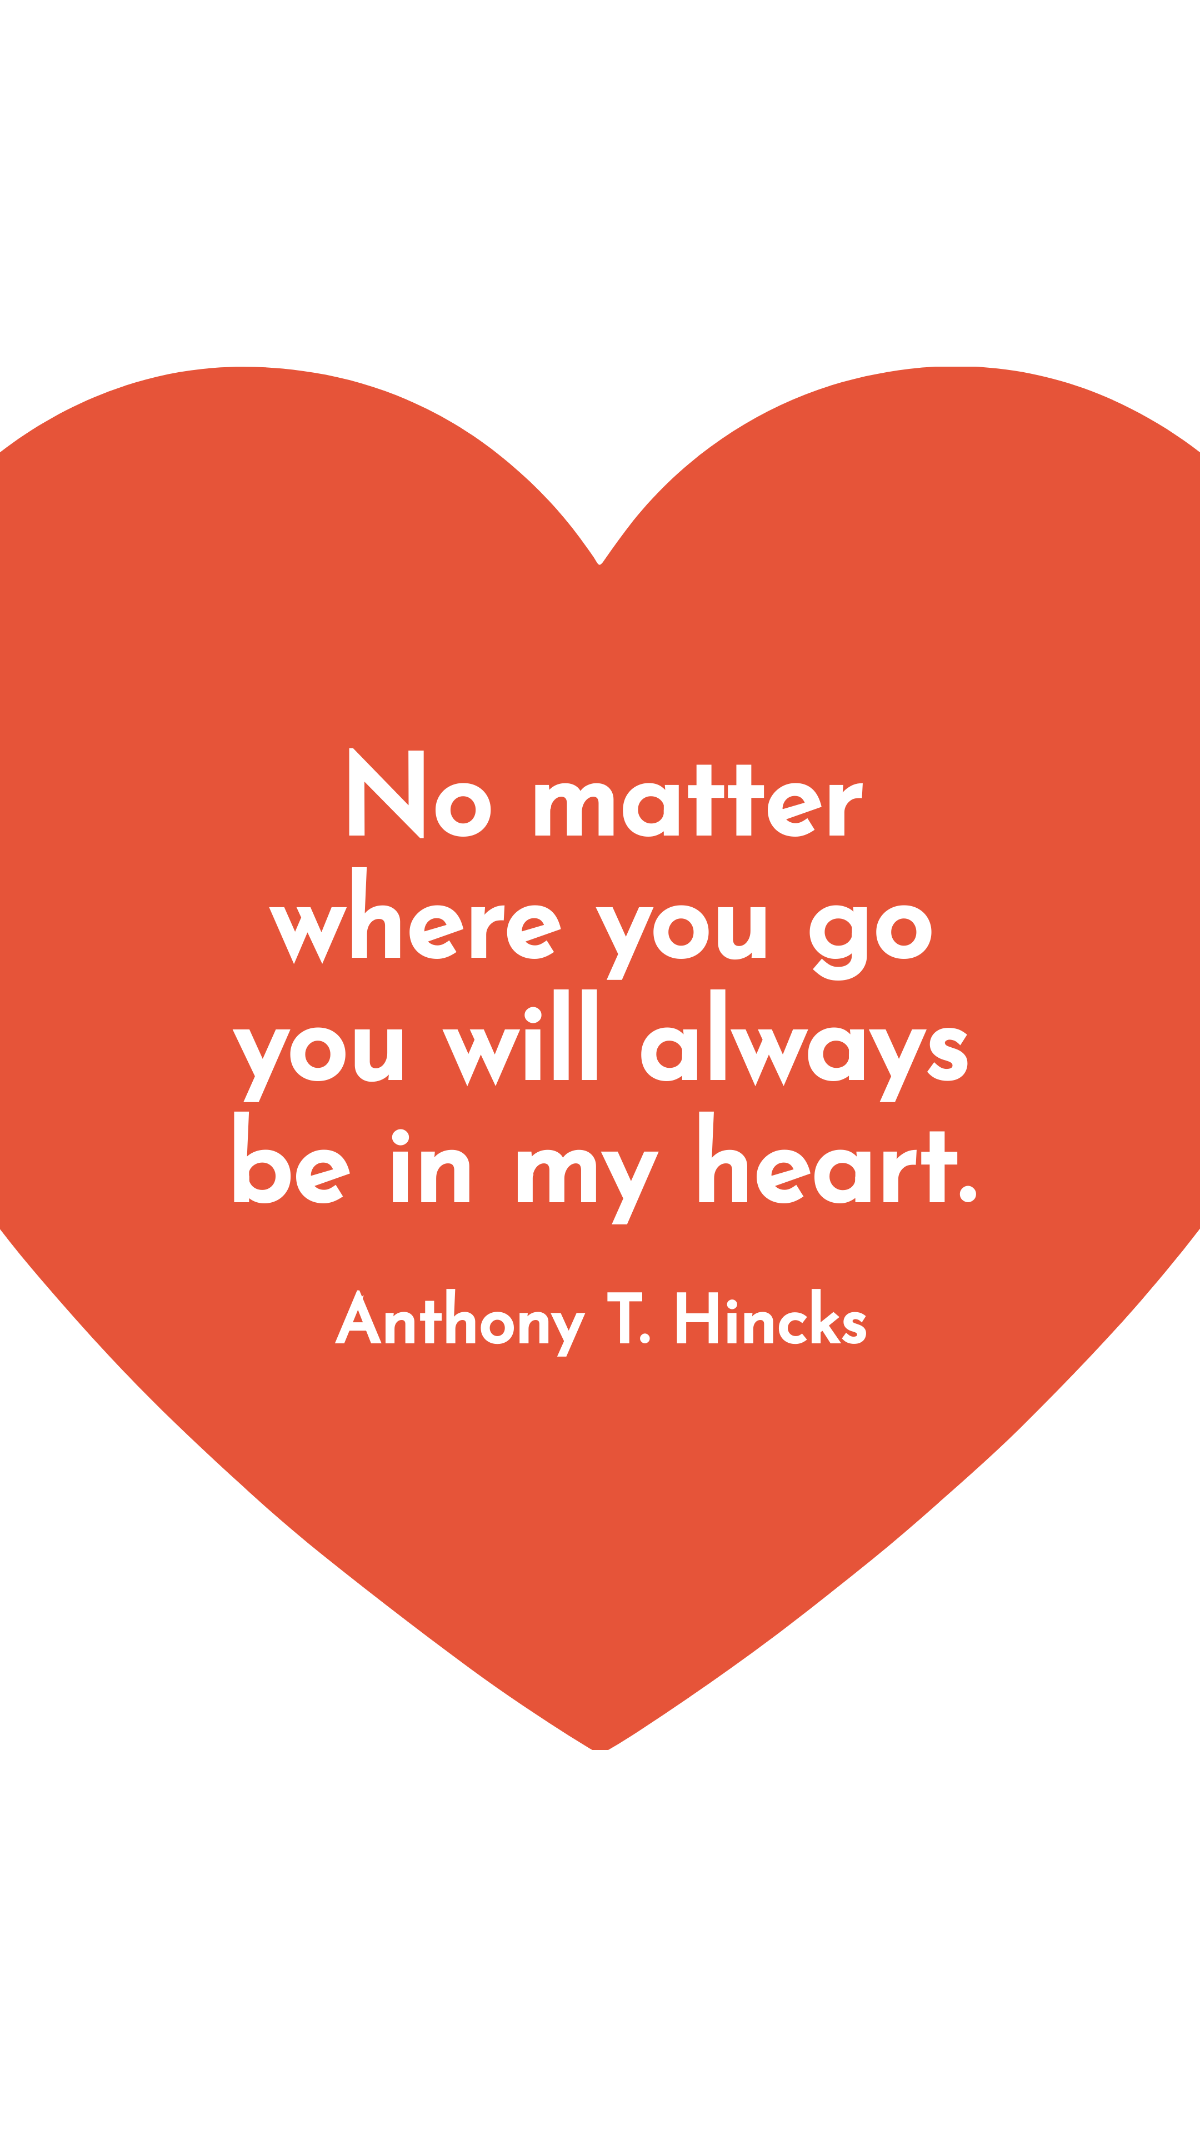 Anthony T. Hincks - No matter where you go you will always be in my heart. Template